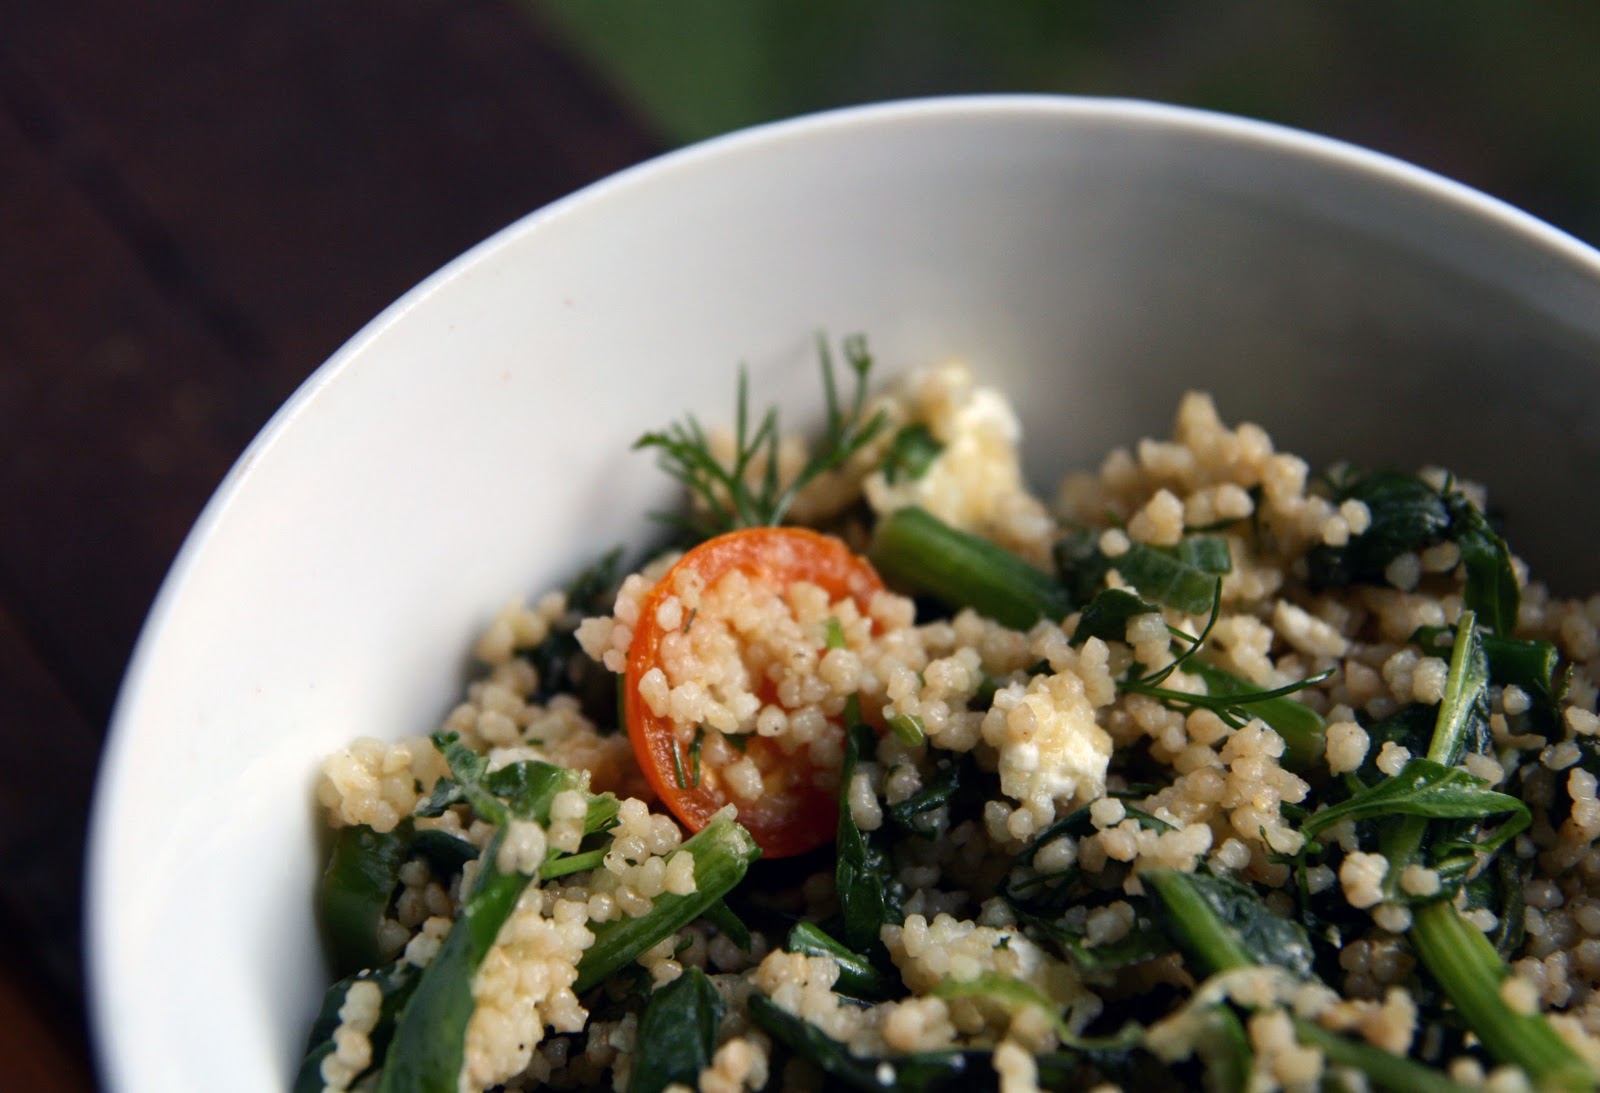 Couscous Salad With Spinach Feta Cherry Tomatoes And Herbs Recipe Mostly Foodstuffs